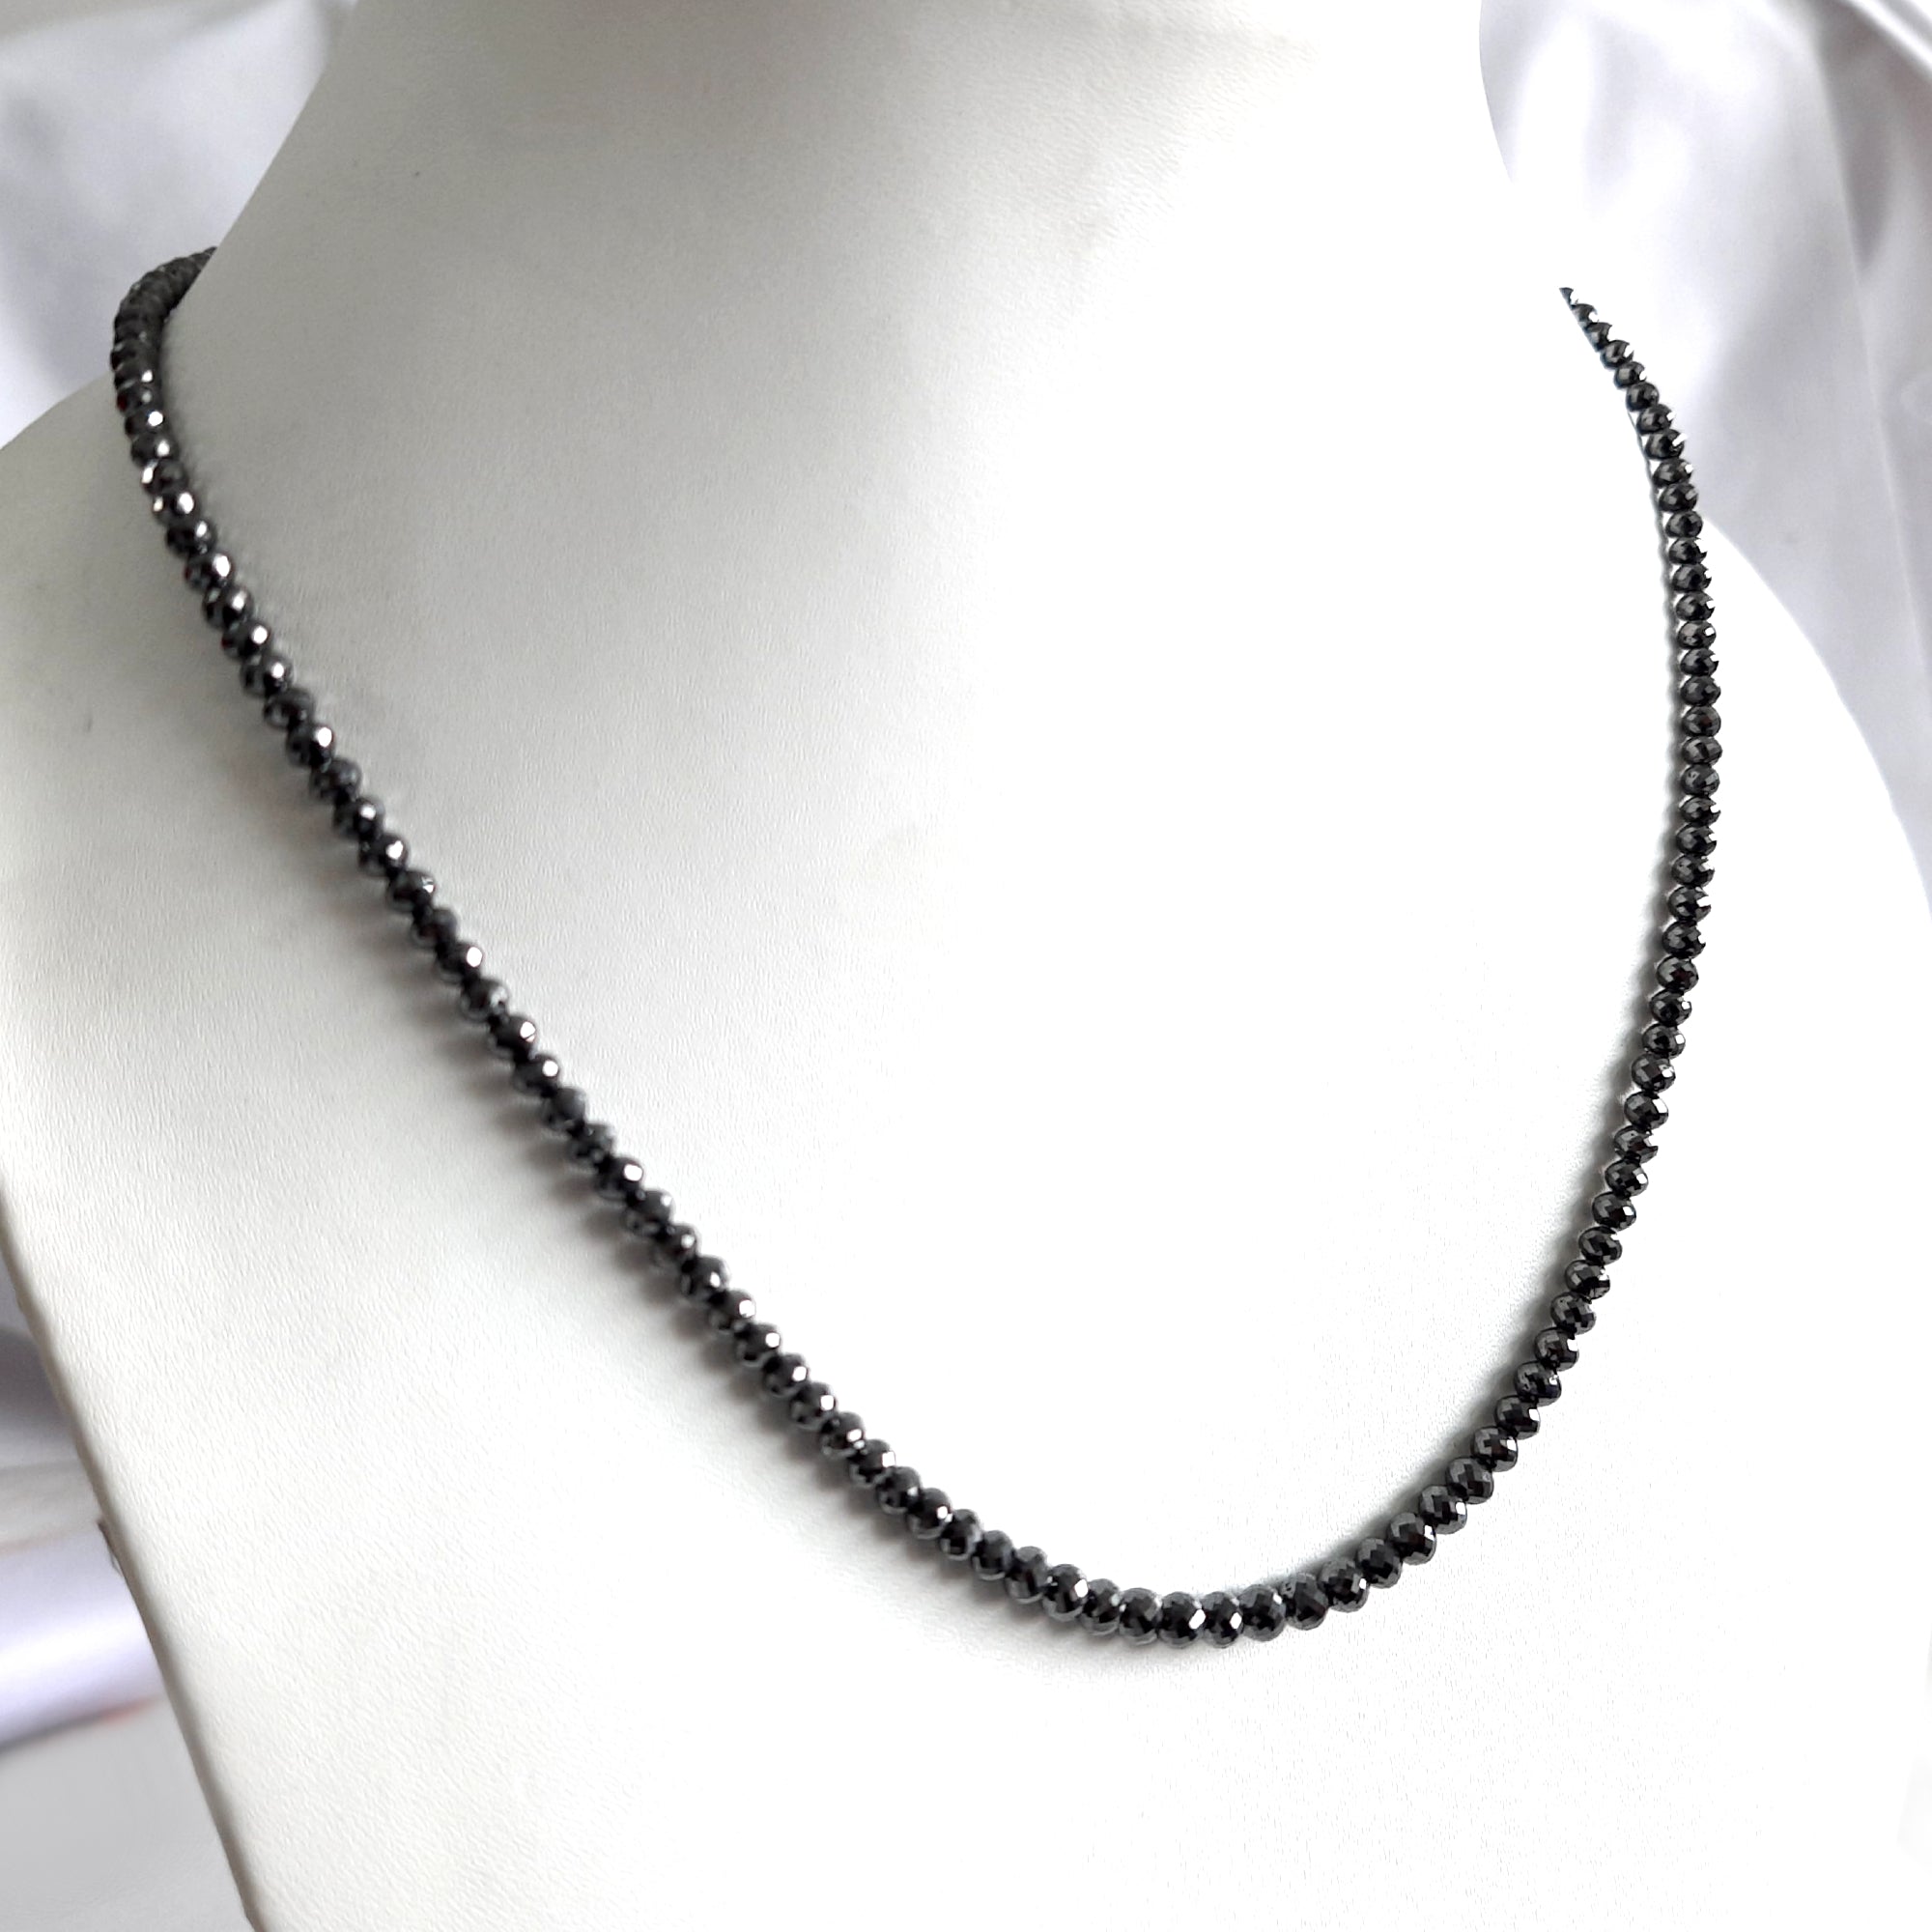 Black Diamond Beads Necklace, 24" Inches Faceted Round Diamond Necklace For Women